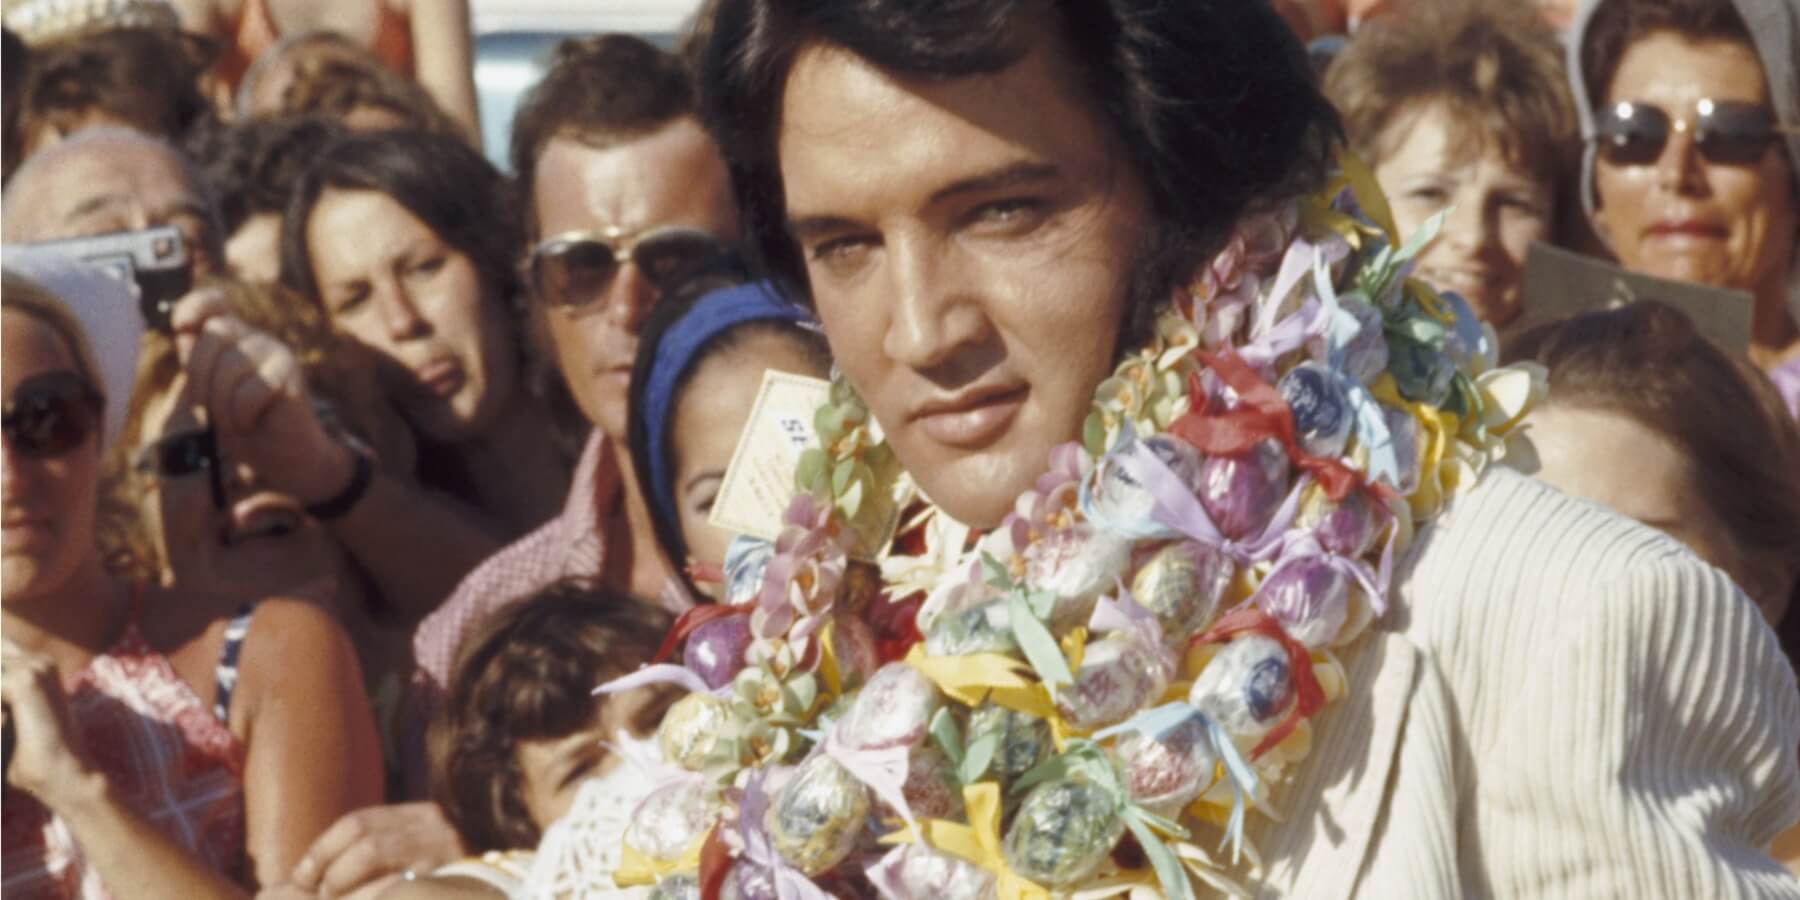 Elvis Presley donated the proceeds from his 'Aloha: From Hawaii' concert to the Kui Lee cancer fund